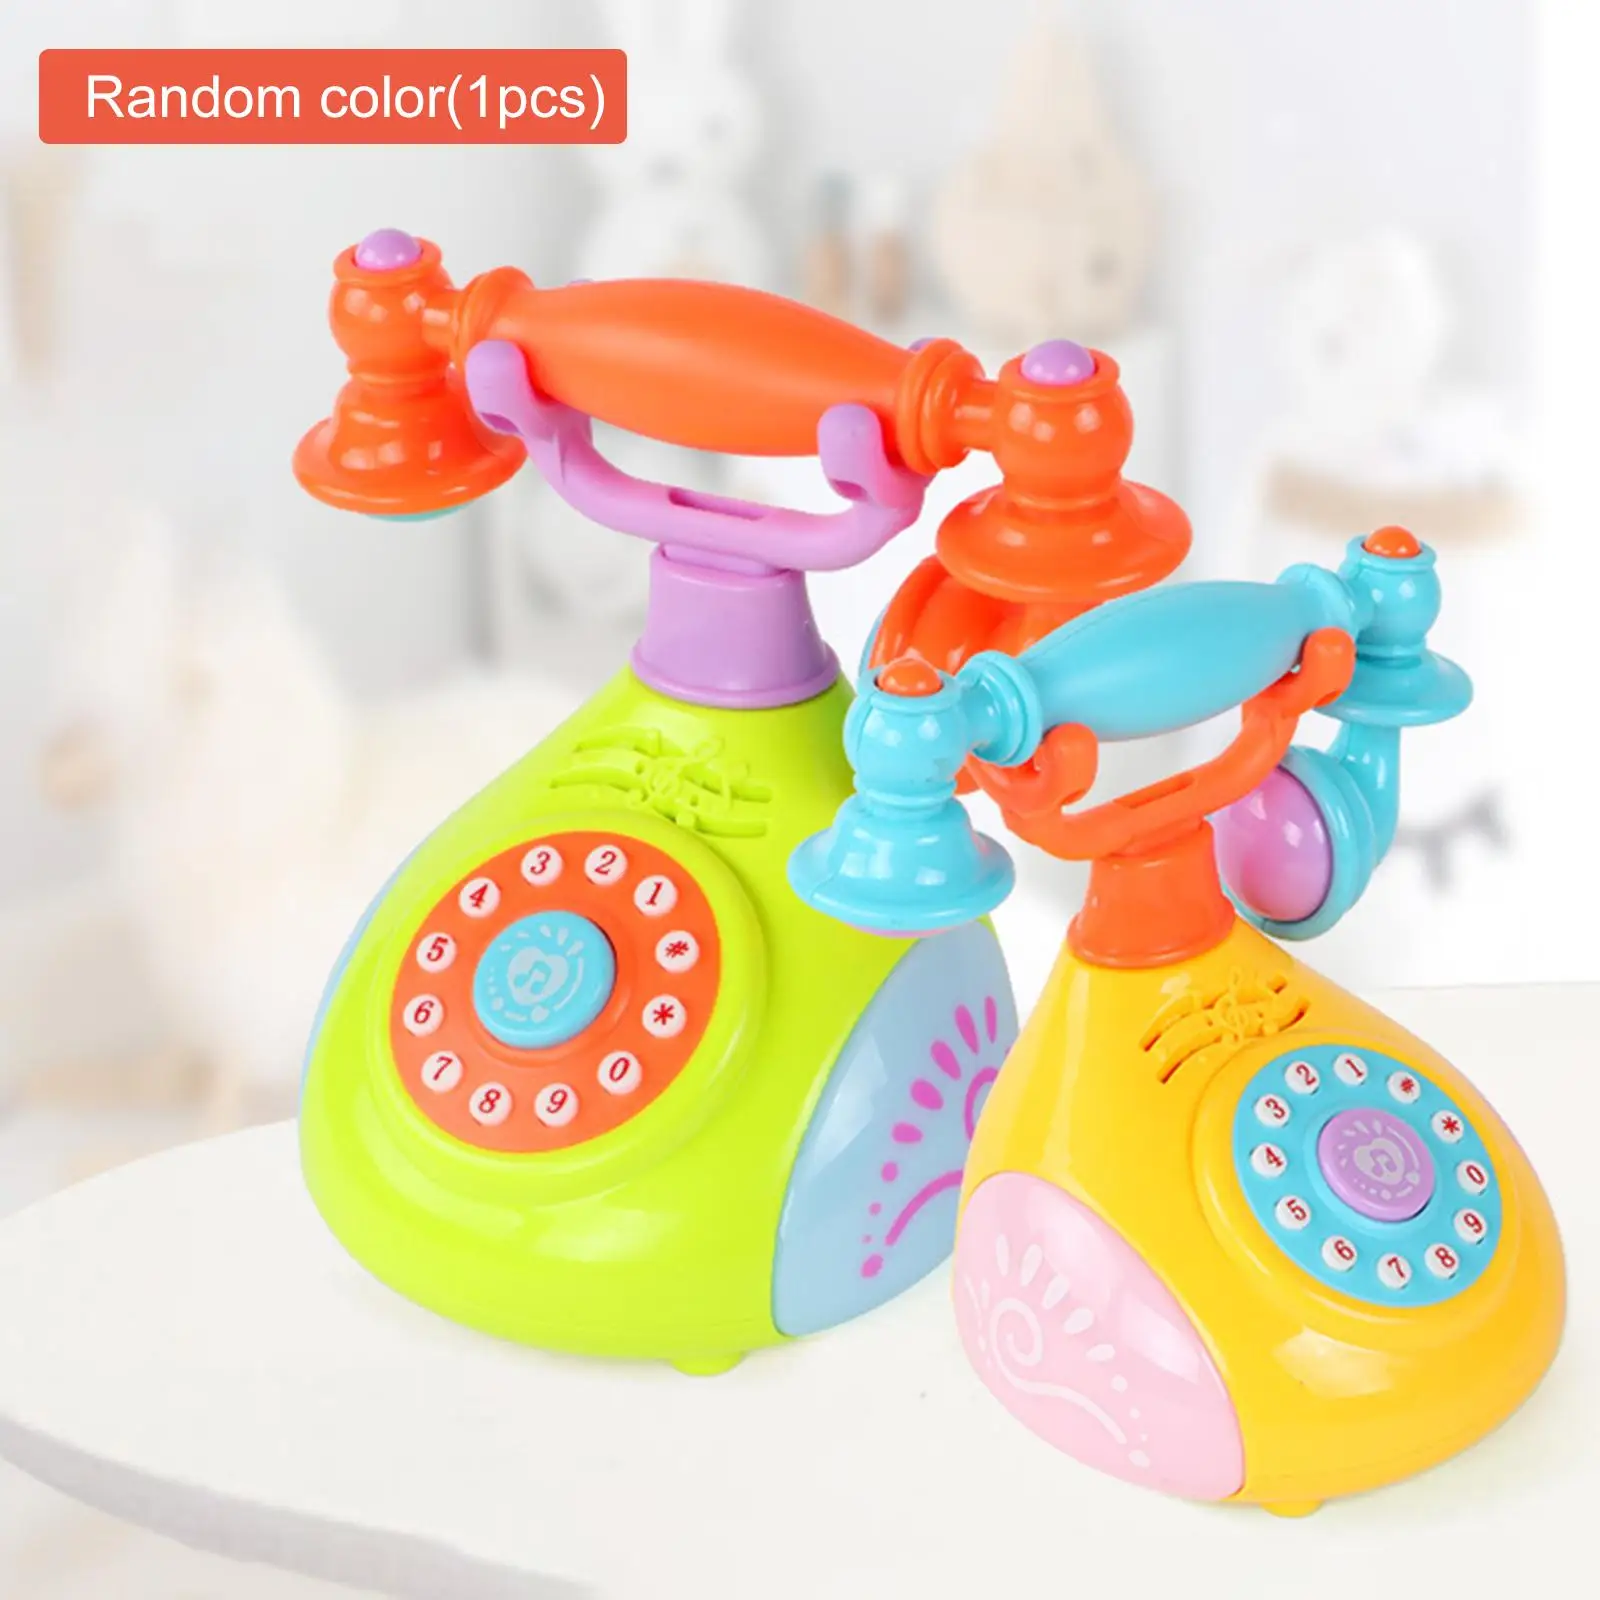 Electric Telephone Landline Toy Parent Child Interactive Toy for Toddlers